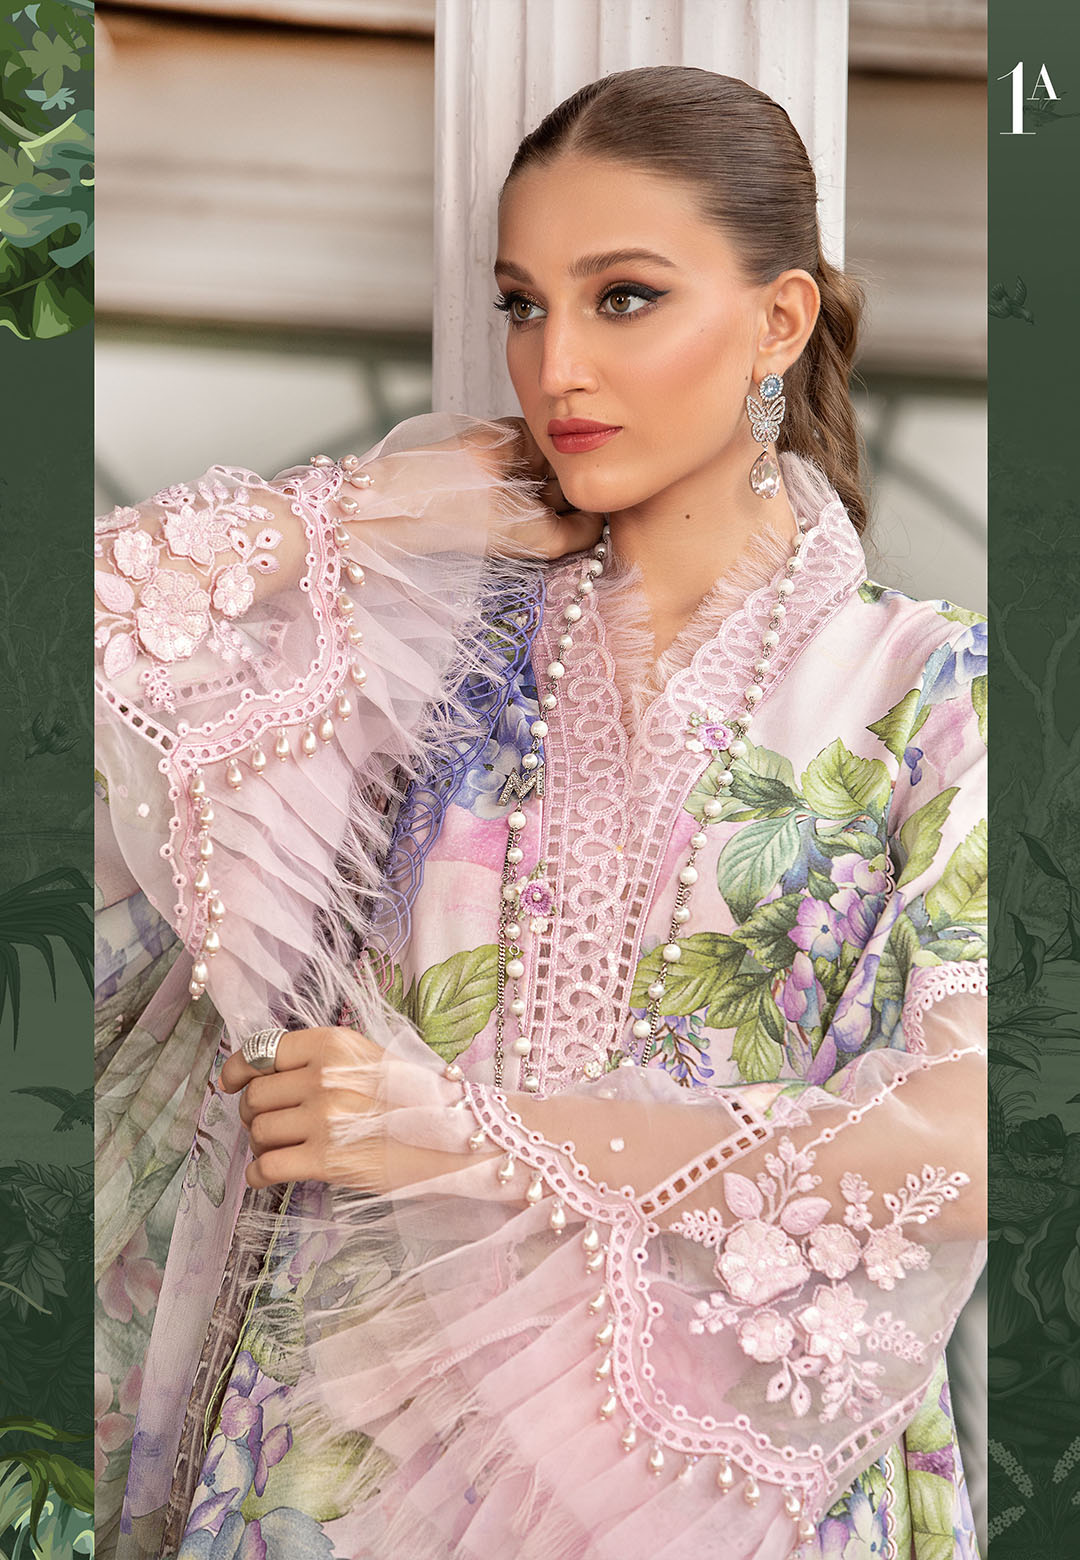 Buy Now, 01A - M Prints - Eid Edit 2023 - Maria. B in UK - Shahana Collection UK - Wedding and Bridal Party Dresses